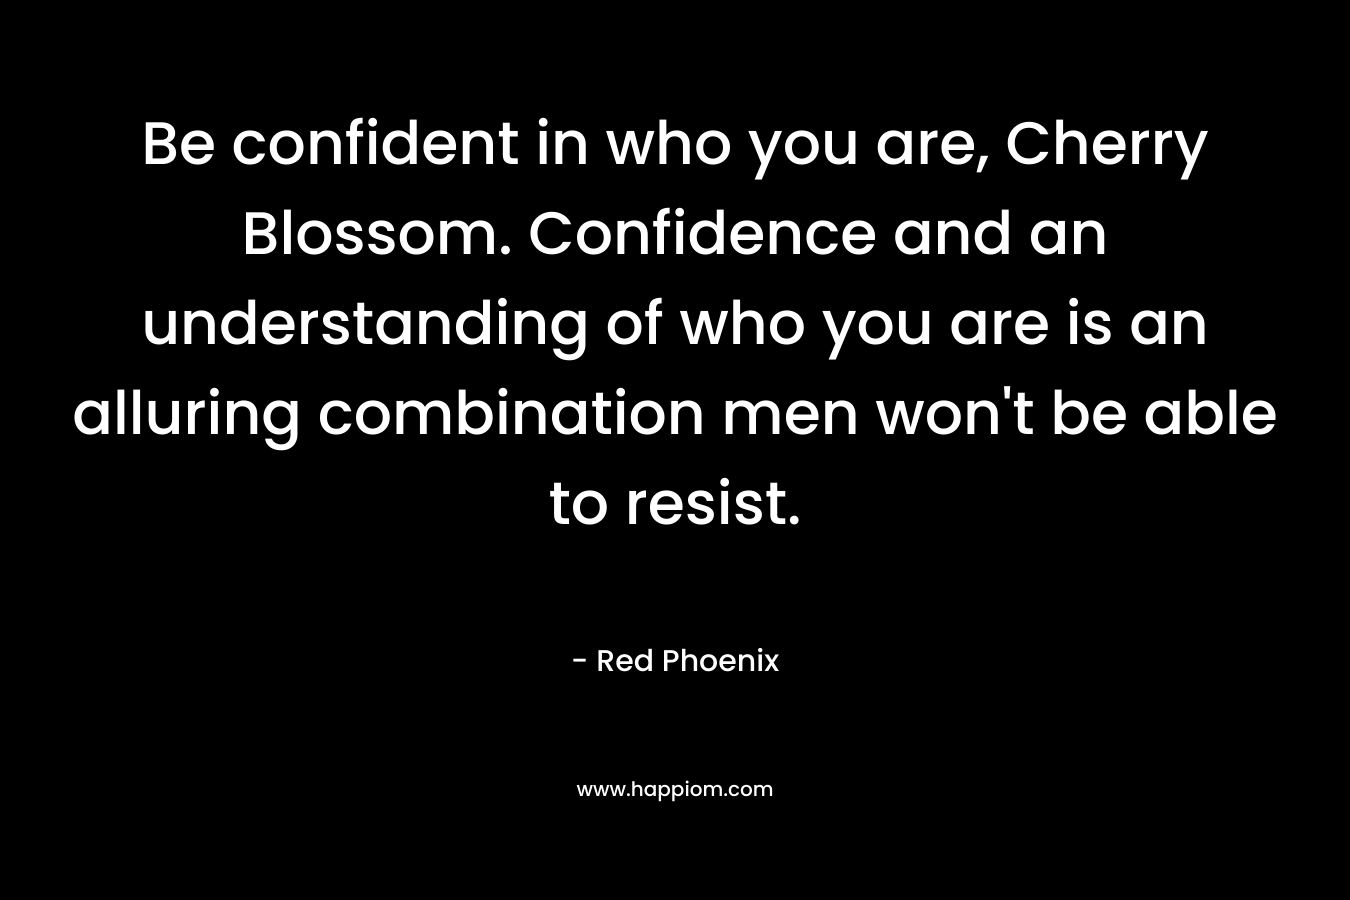 Be confident in who you are, Cherry Blossom. Confidence and an understanding of who you are is an alluring combination men won’t be able to resist. – Red Phoenix